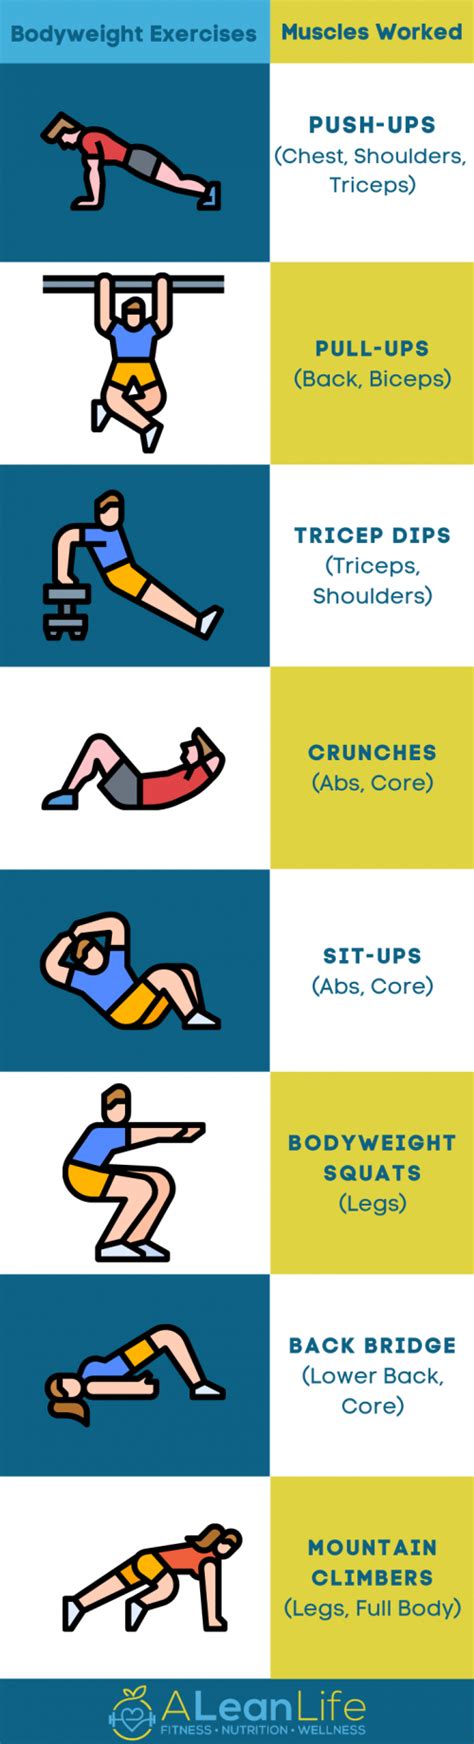 Complete List Of Bodyweight Exercises For A Lean Physique A Lean Life